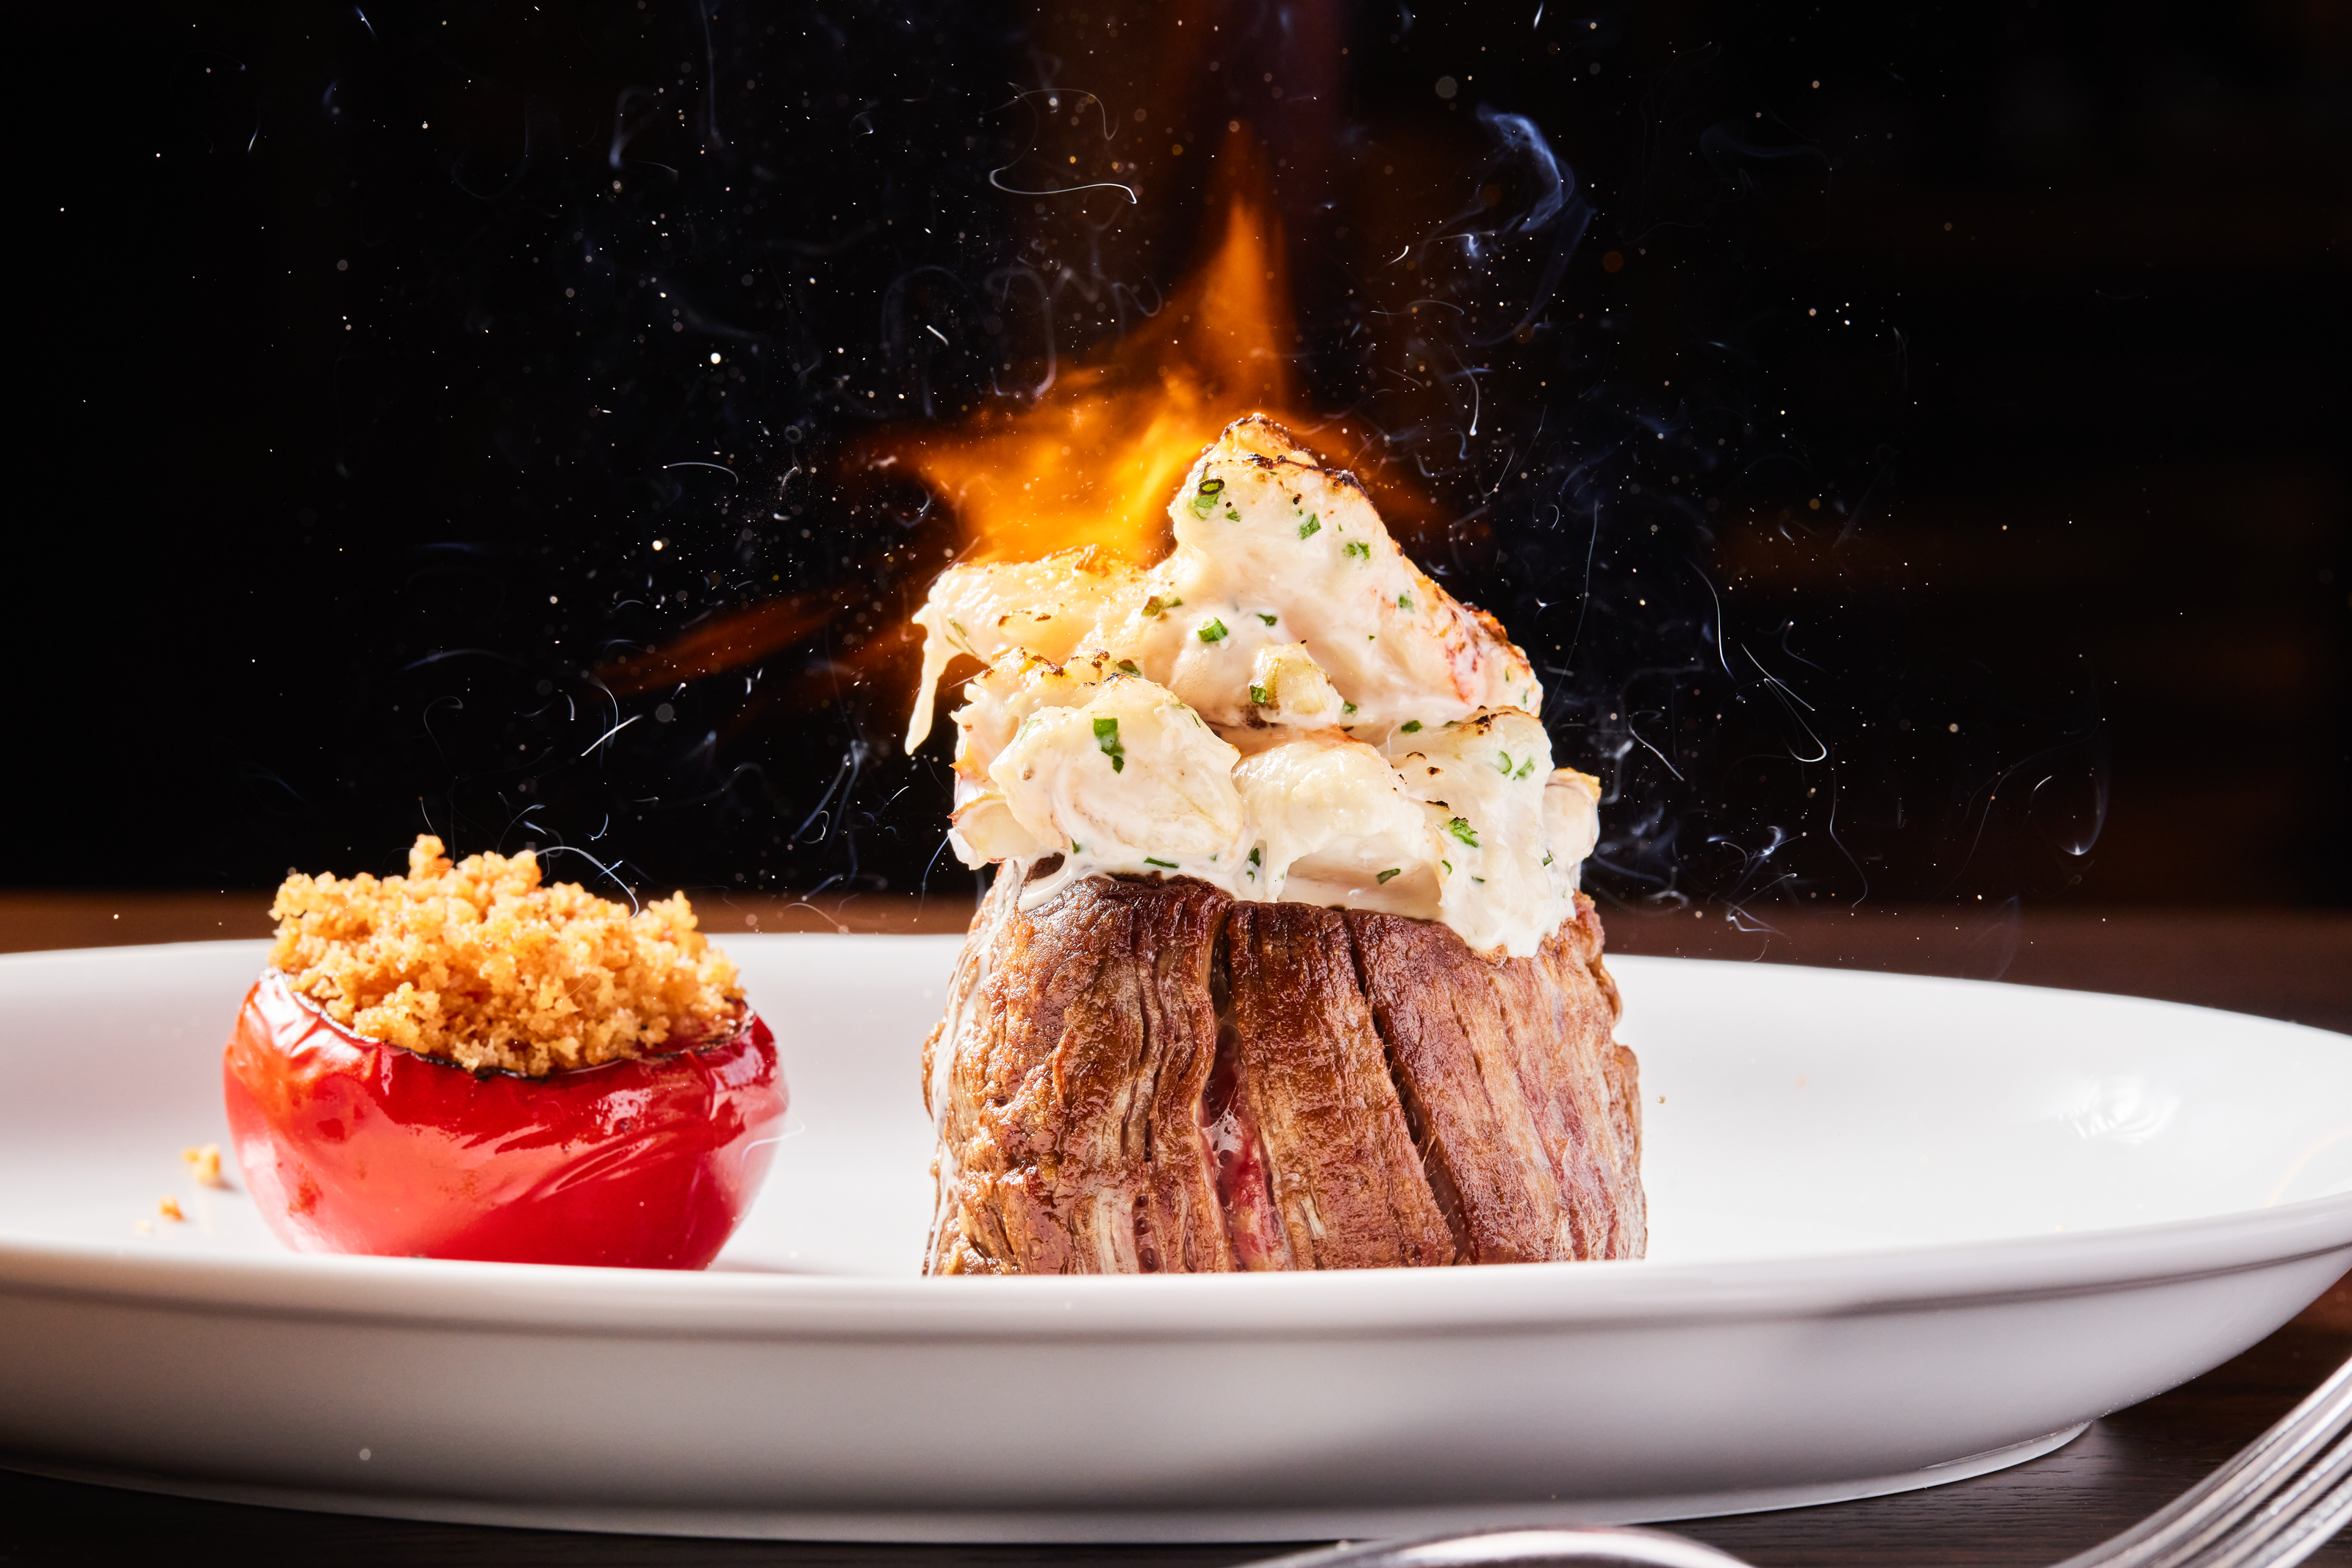 Torched filet mignon at the Vault Steakhouse